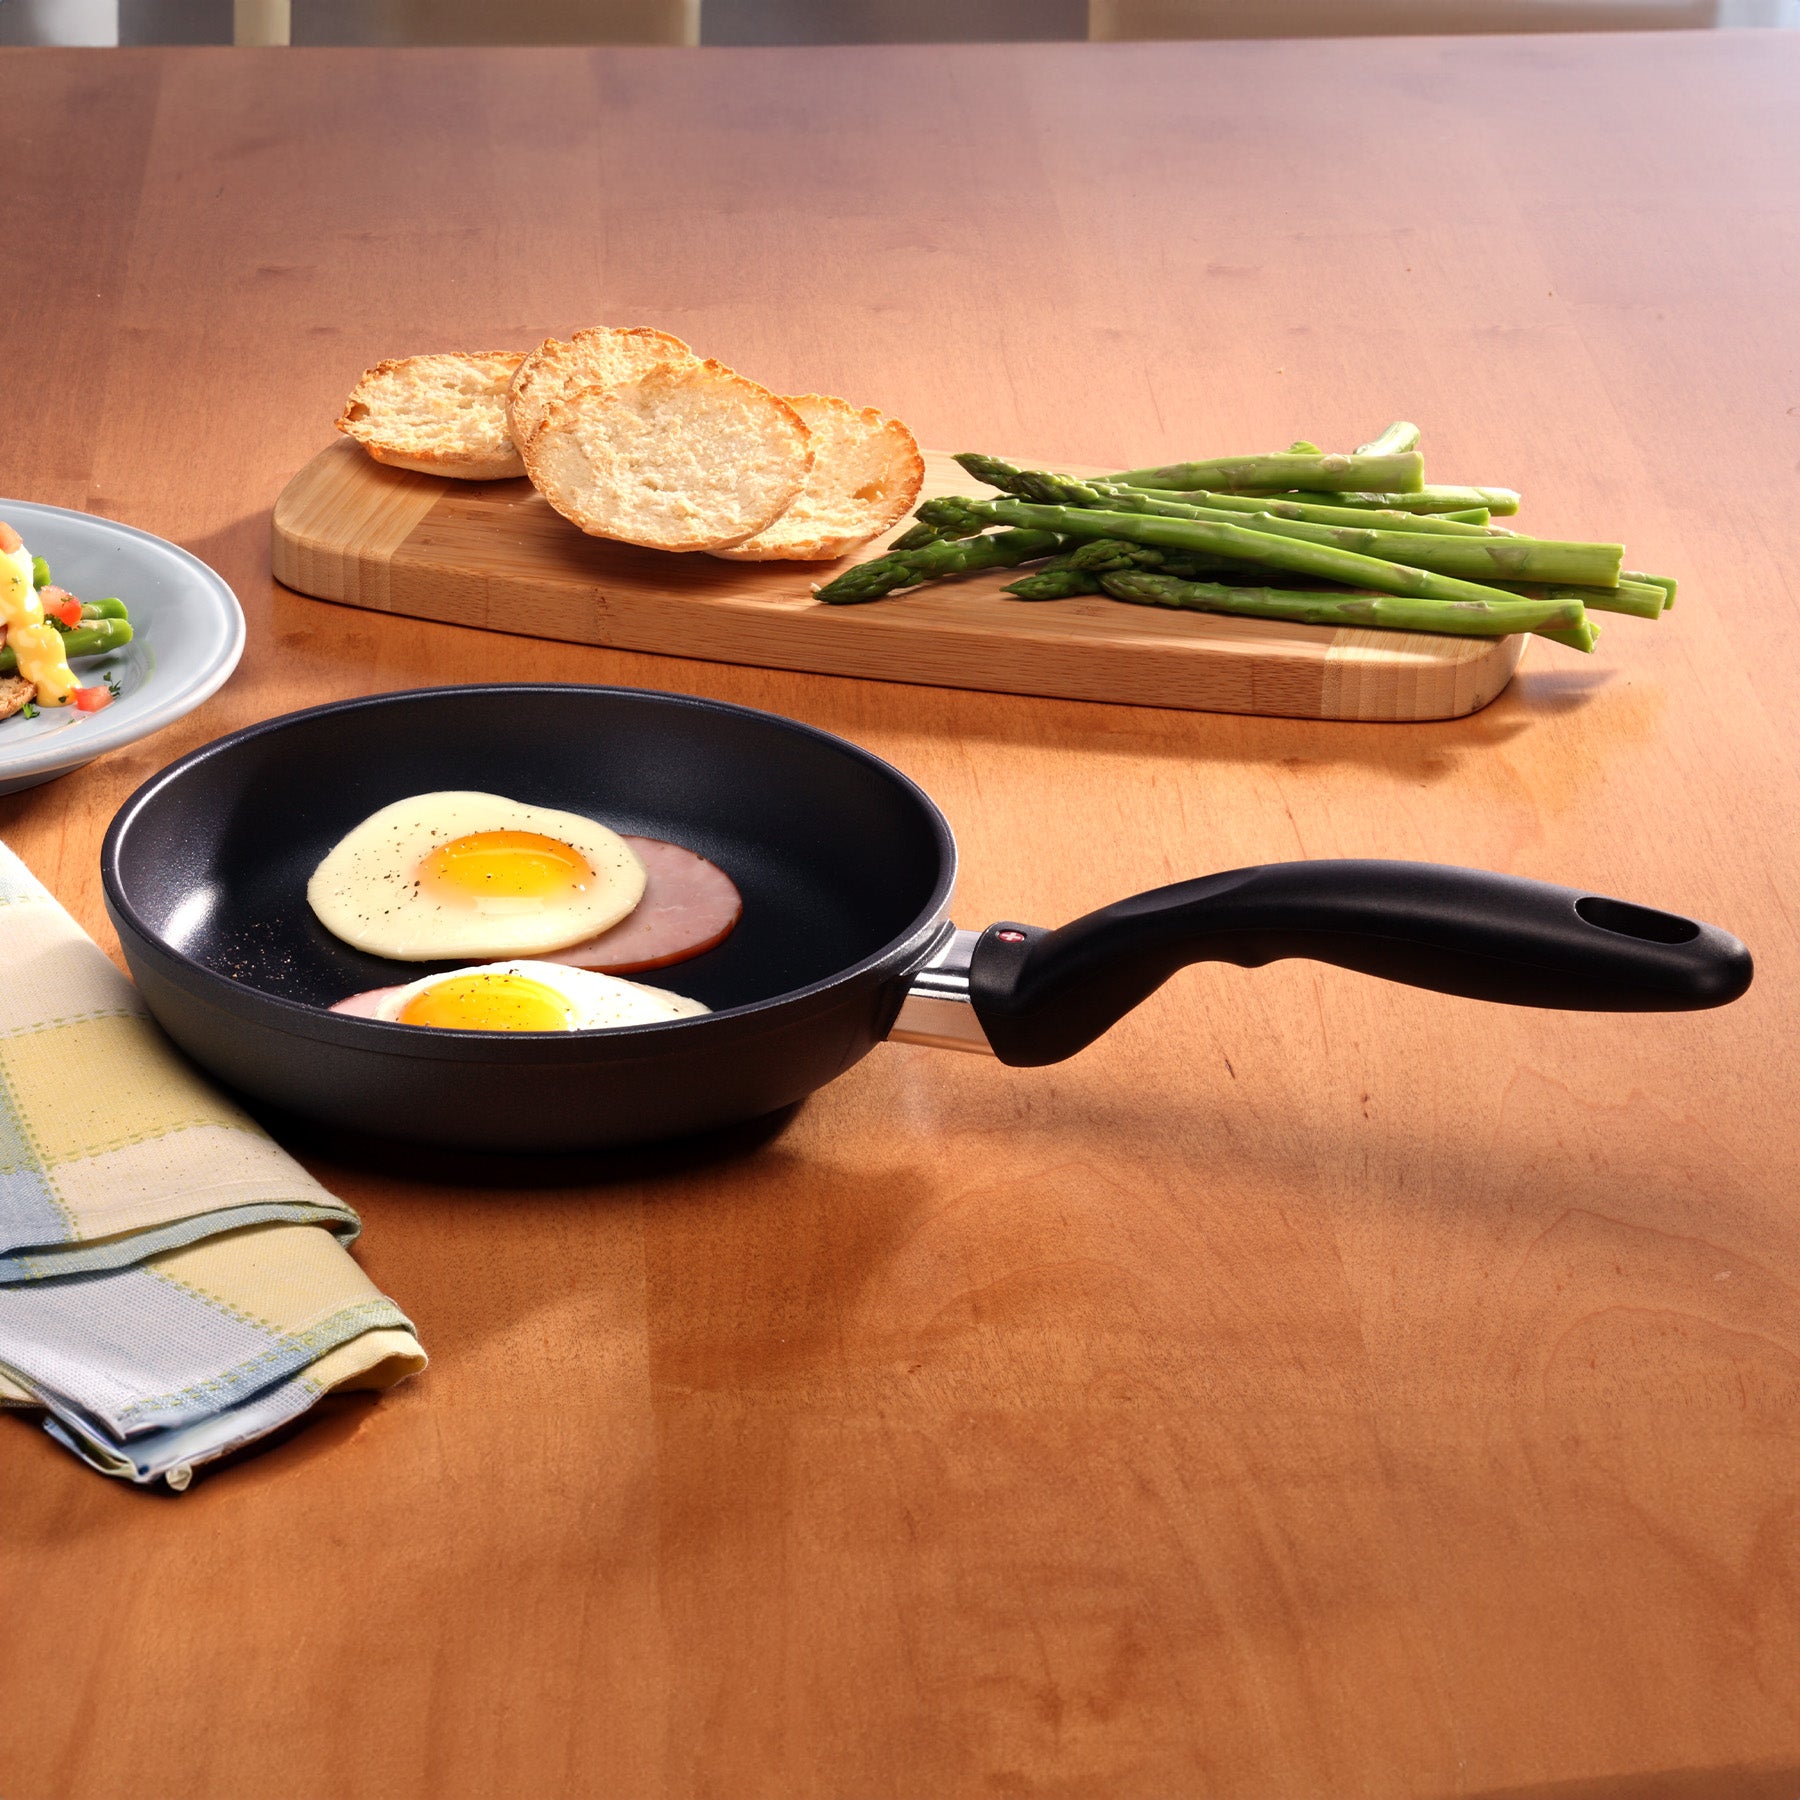 HD Nonstick Fry Pan - Induction in use on dining room table